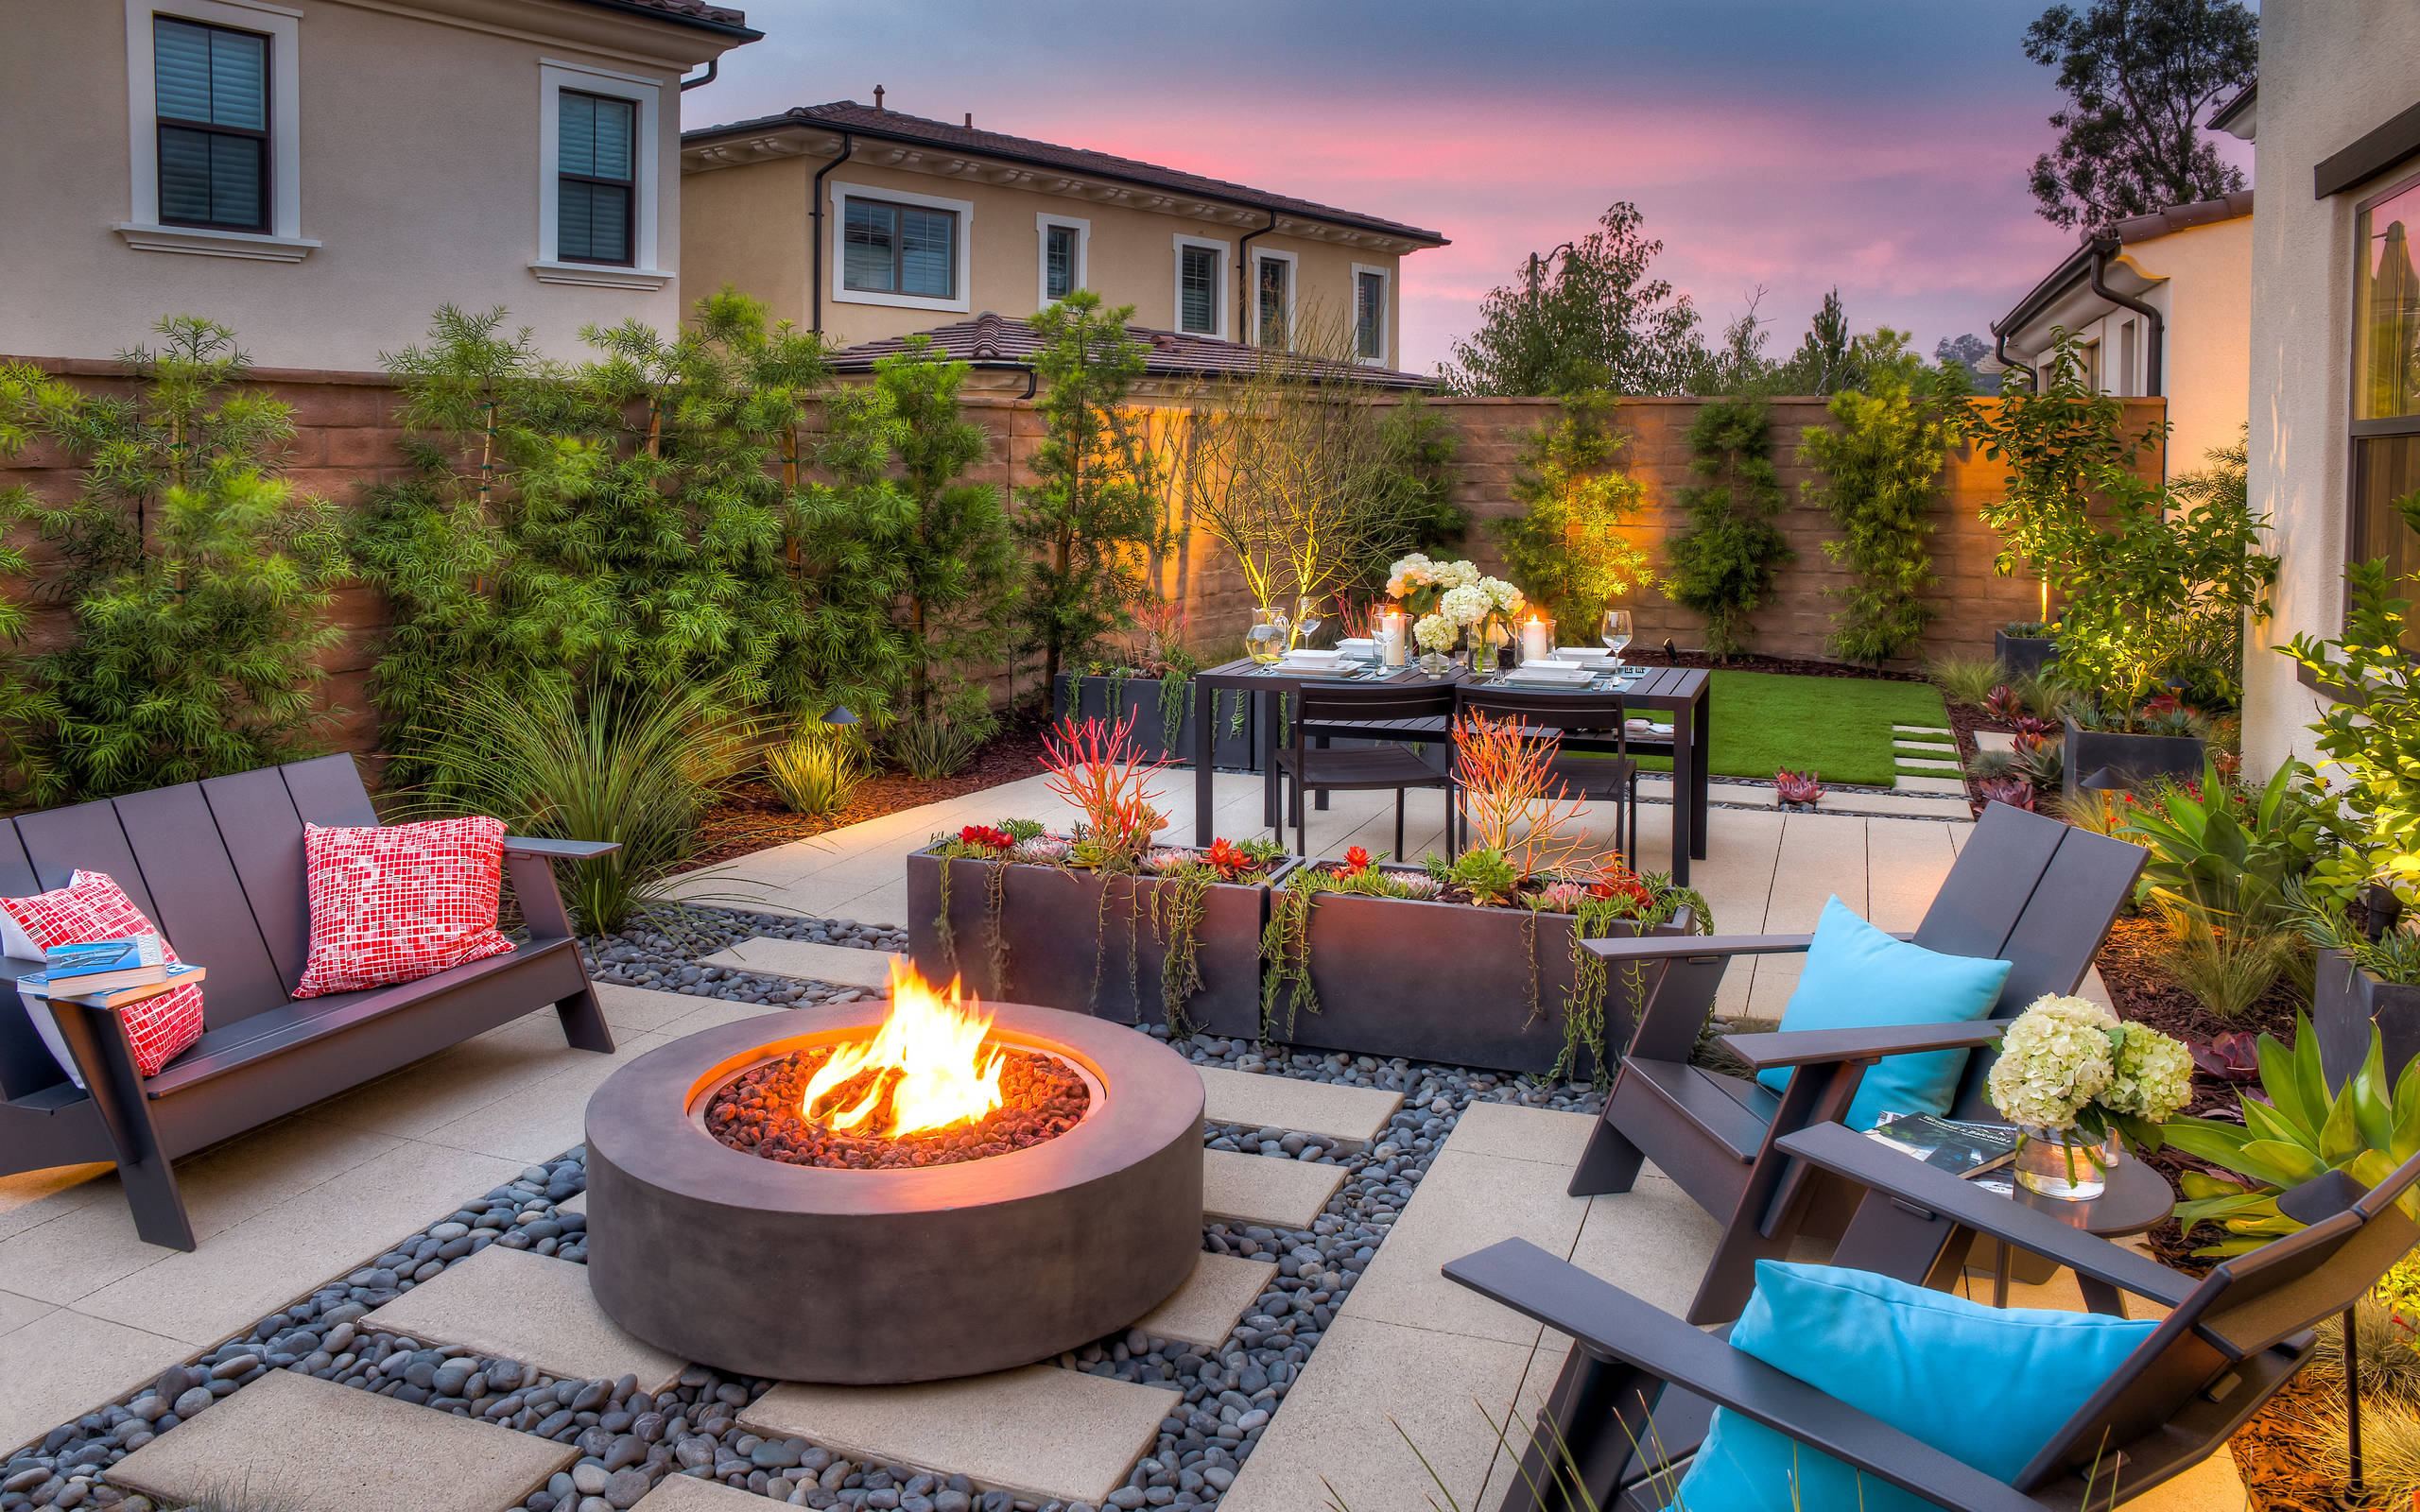 75 Beautiful Small Backyard Landscaping Pictures Ideas December 2020 Houzz